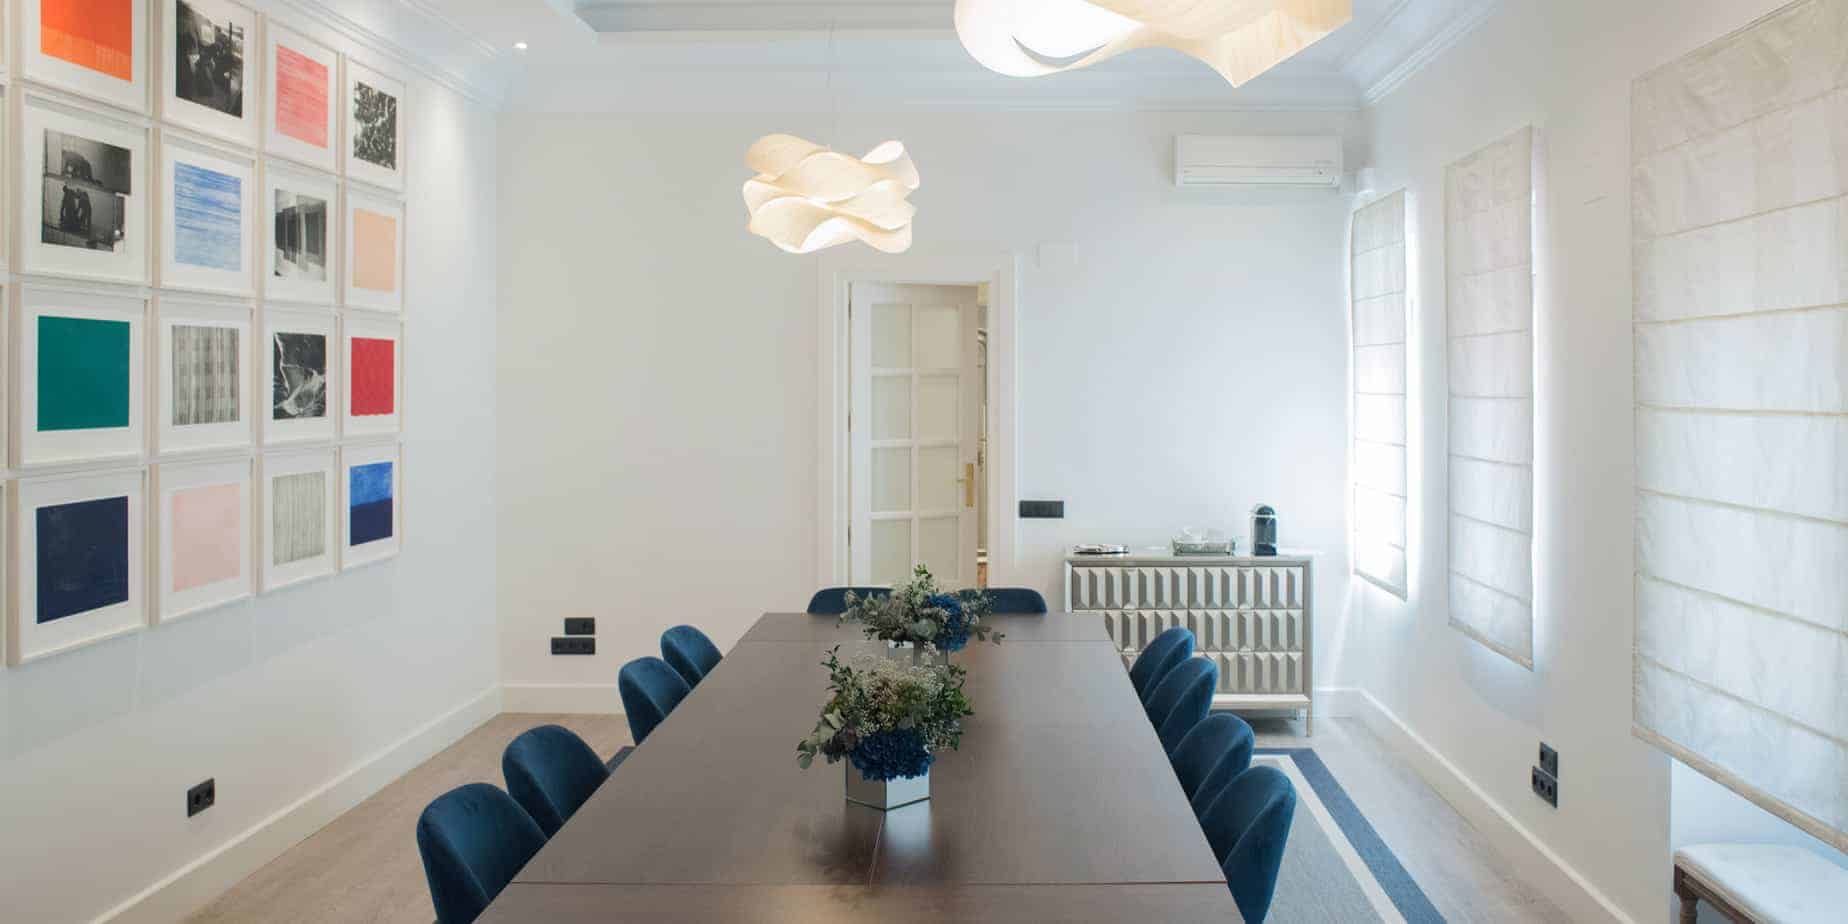 Luminous boardroom with color accents in Salamanca district